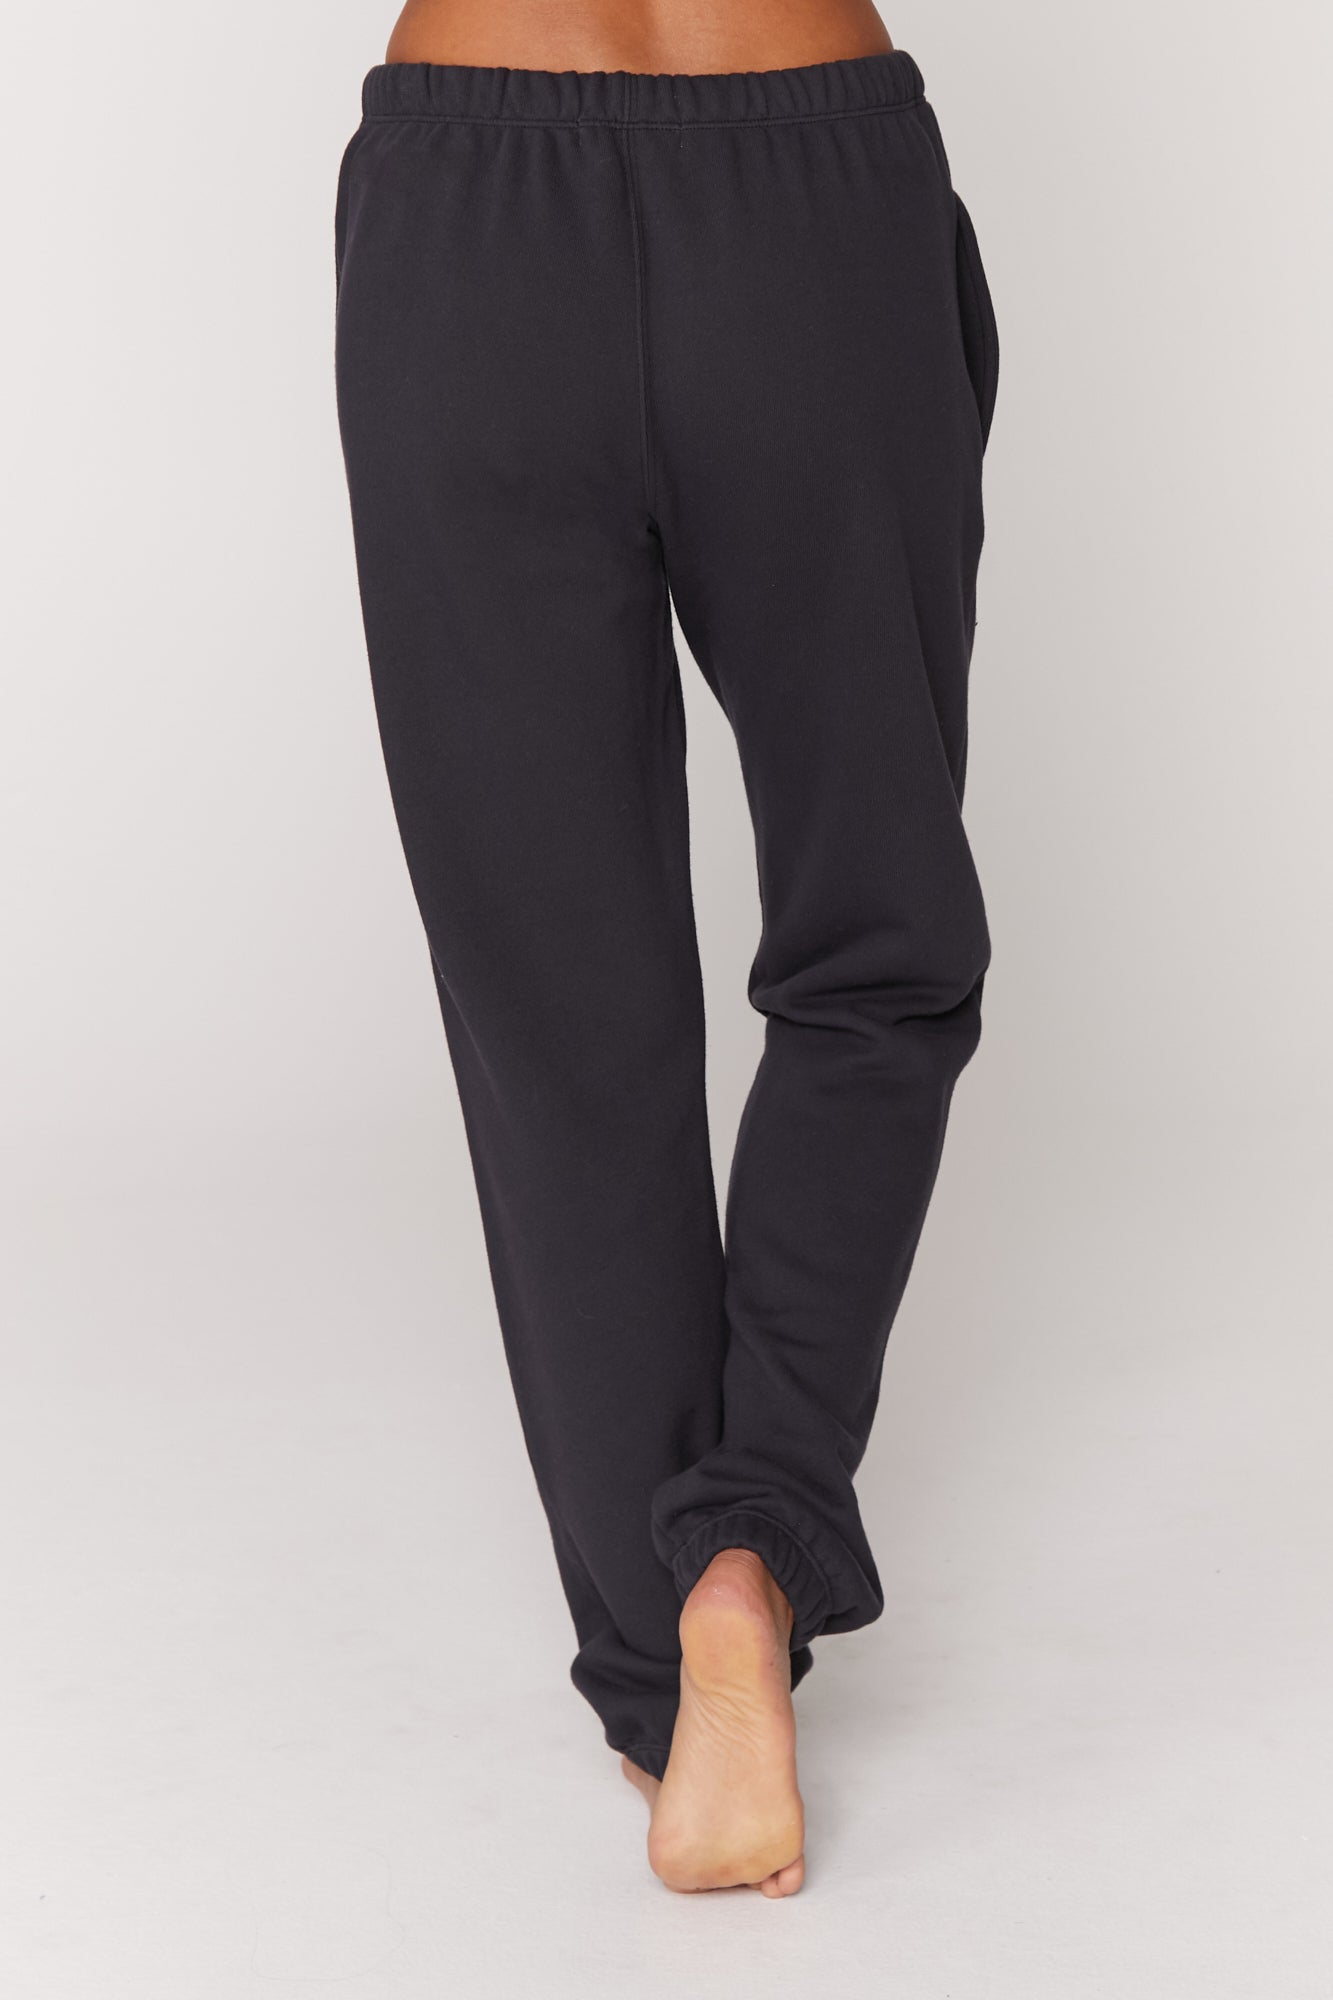 You were born to lounge. Full length means full comfort in our super soft and easy to wear SG Laguna Sweatpant. Made with 100% cotton, a slouchy and relaxed oversized fit for maximum comfort, elastic waistline and ankles, and "Spiritual Gangster" front logo. Perfect to throw on after a sweat session or for casual days. 